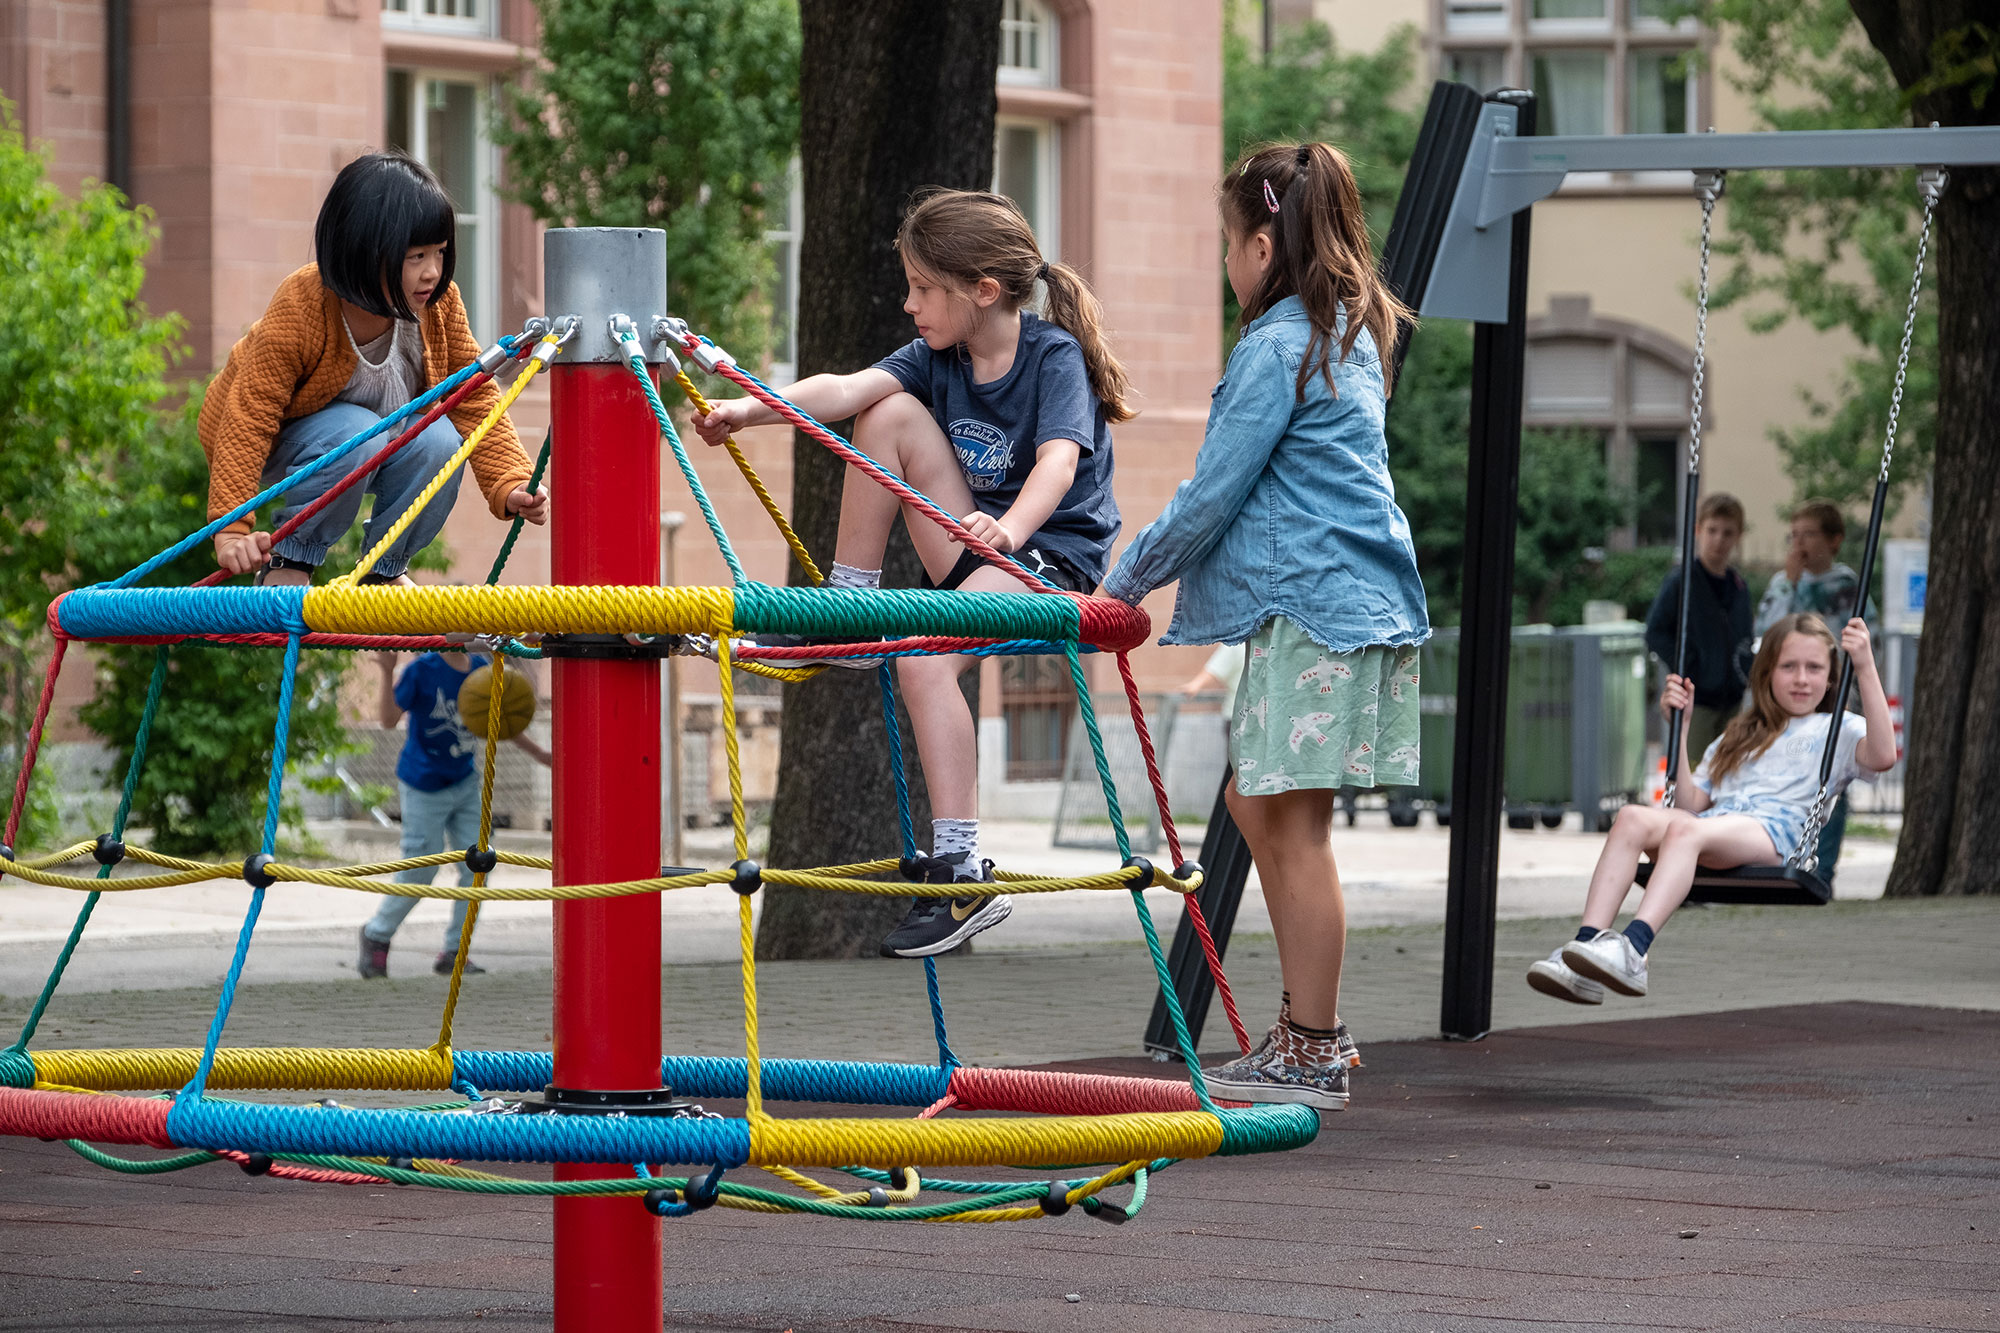 Three girls are playing on a round merry-go-round in the playground.	